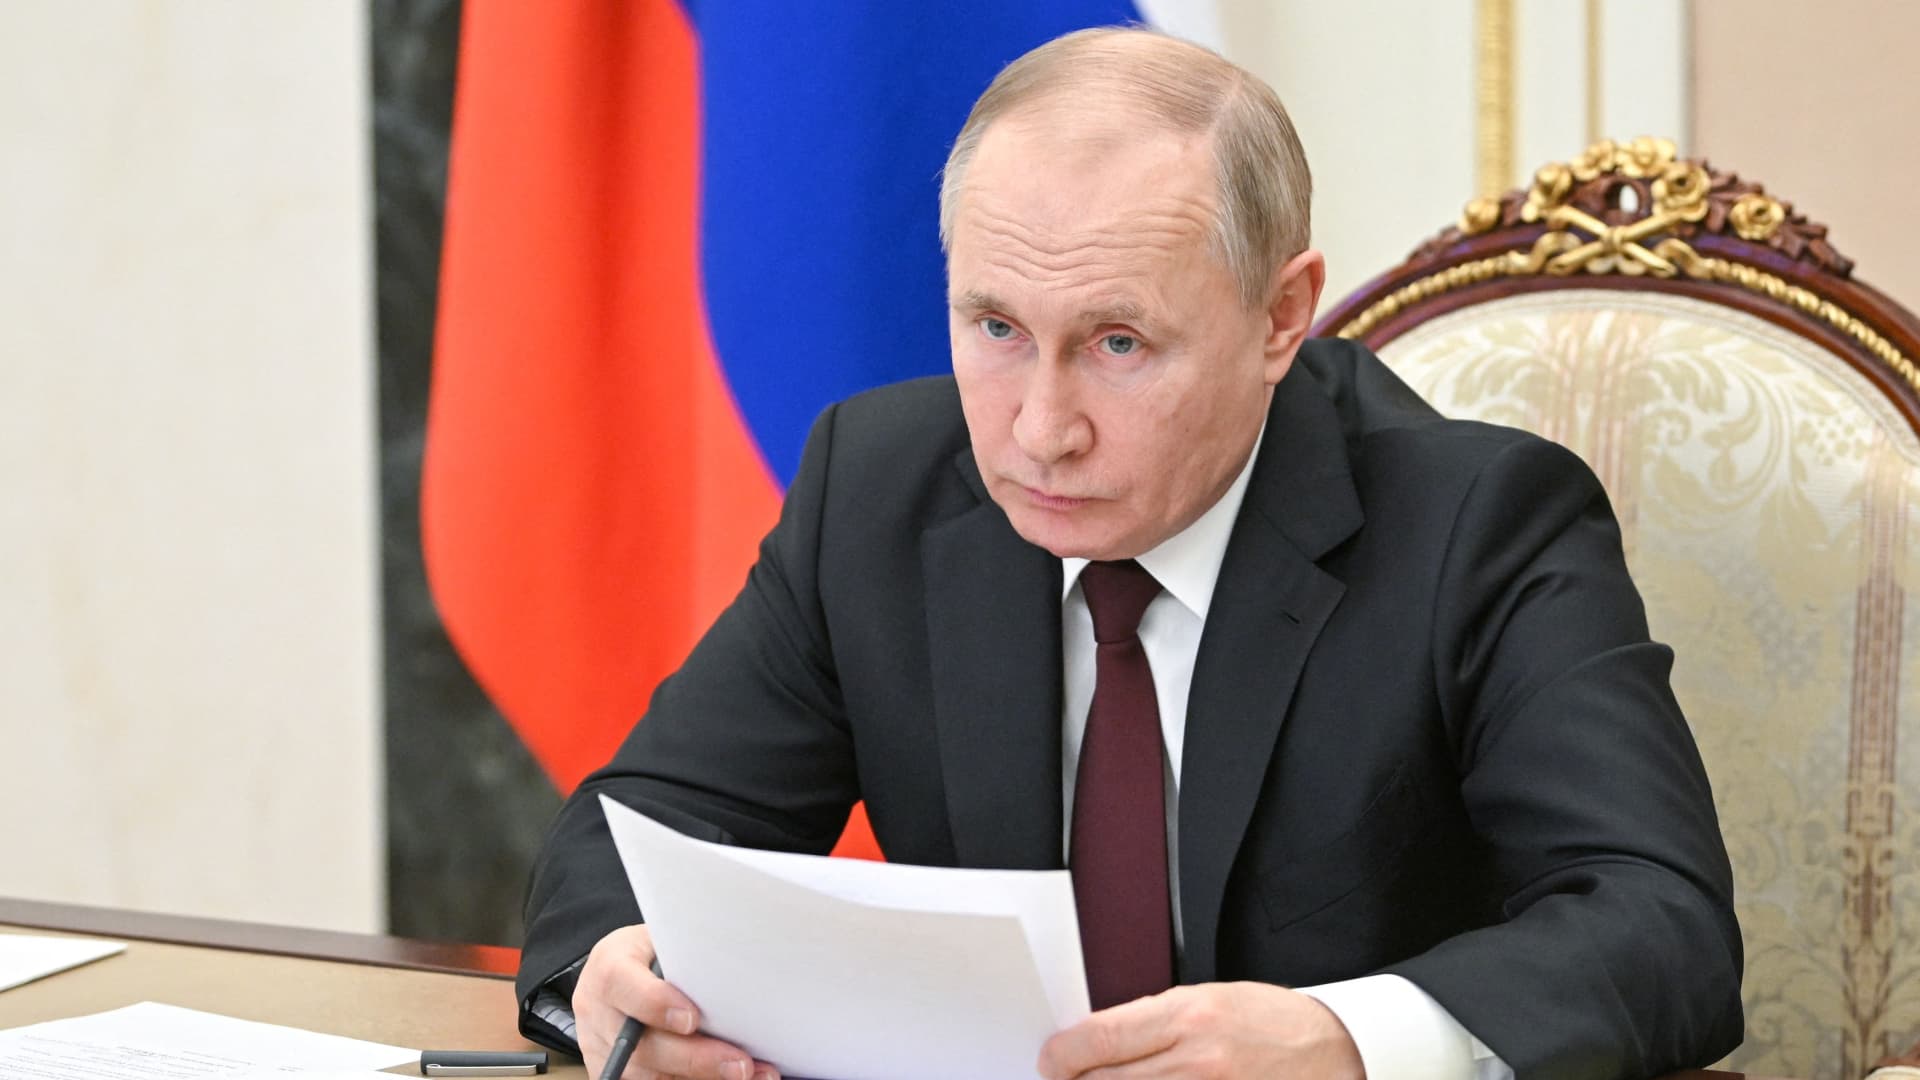 Russian President Vladimir Putin chairs a meeting on economic issues via a video link in Moscow, Russia February 17, 2022.